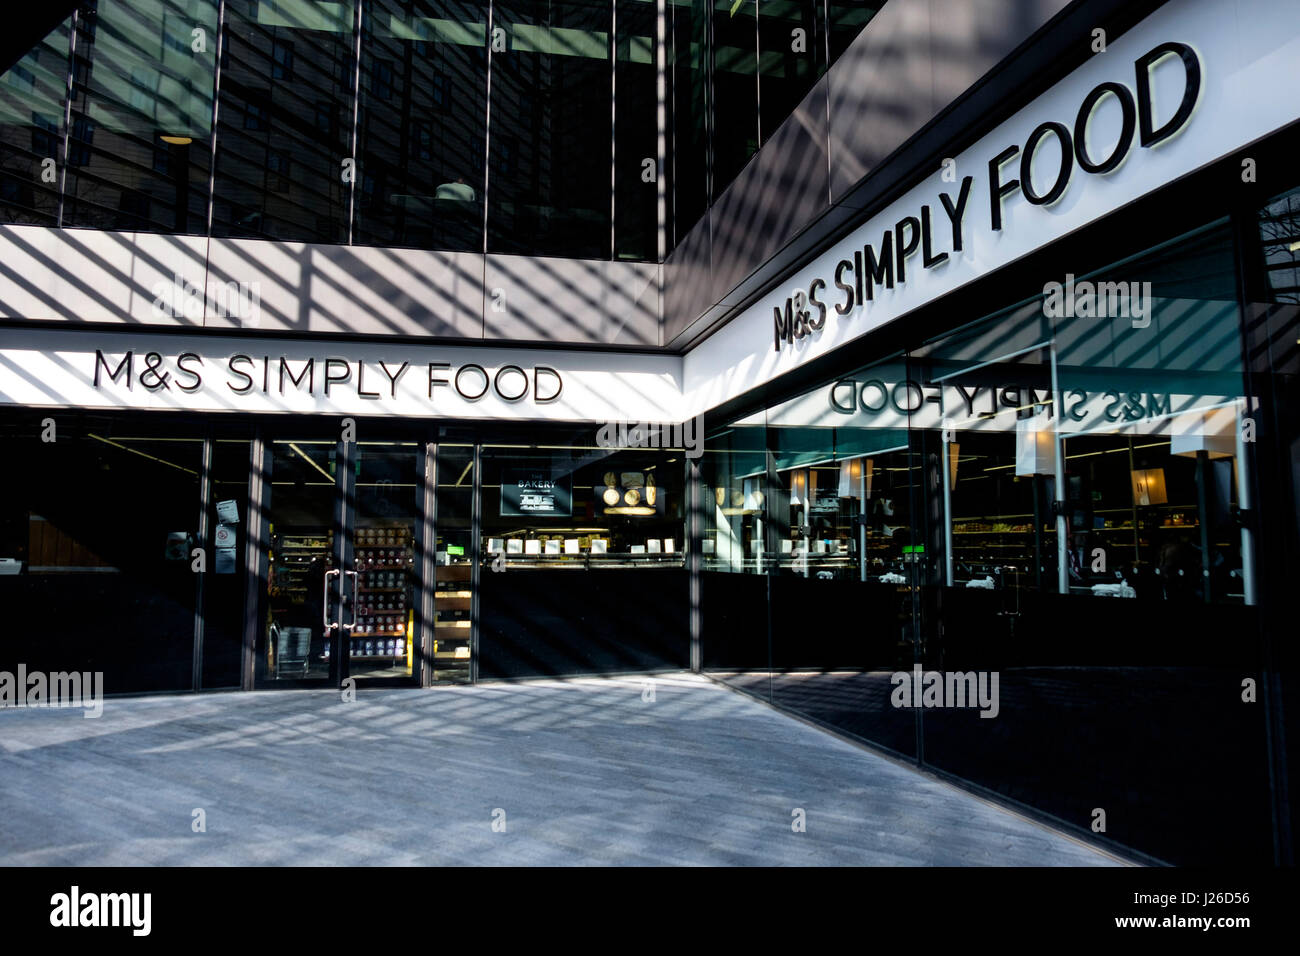 Marks & Spencer M&S Simply Food store, London, England, UK, Europe Stock Photo